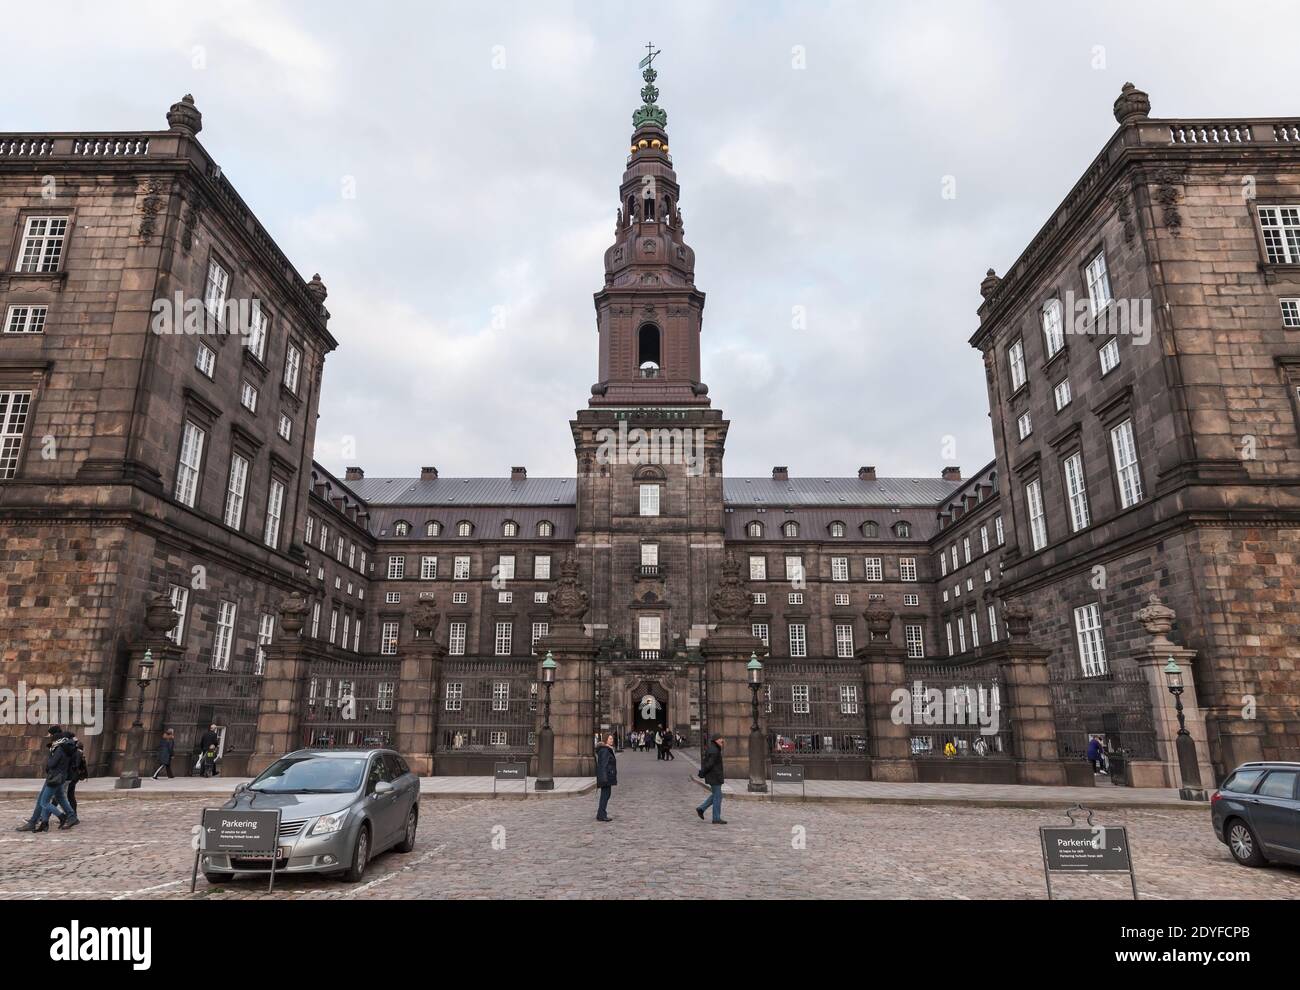 Copenhagen, Denmark - December 10, 2017: Tourists are in front of Christiansborg Palace, a palace and government building on the islet of Slotsholmen Stock Photo